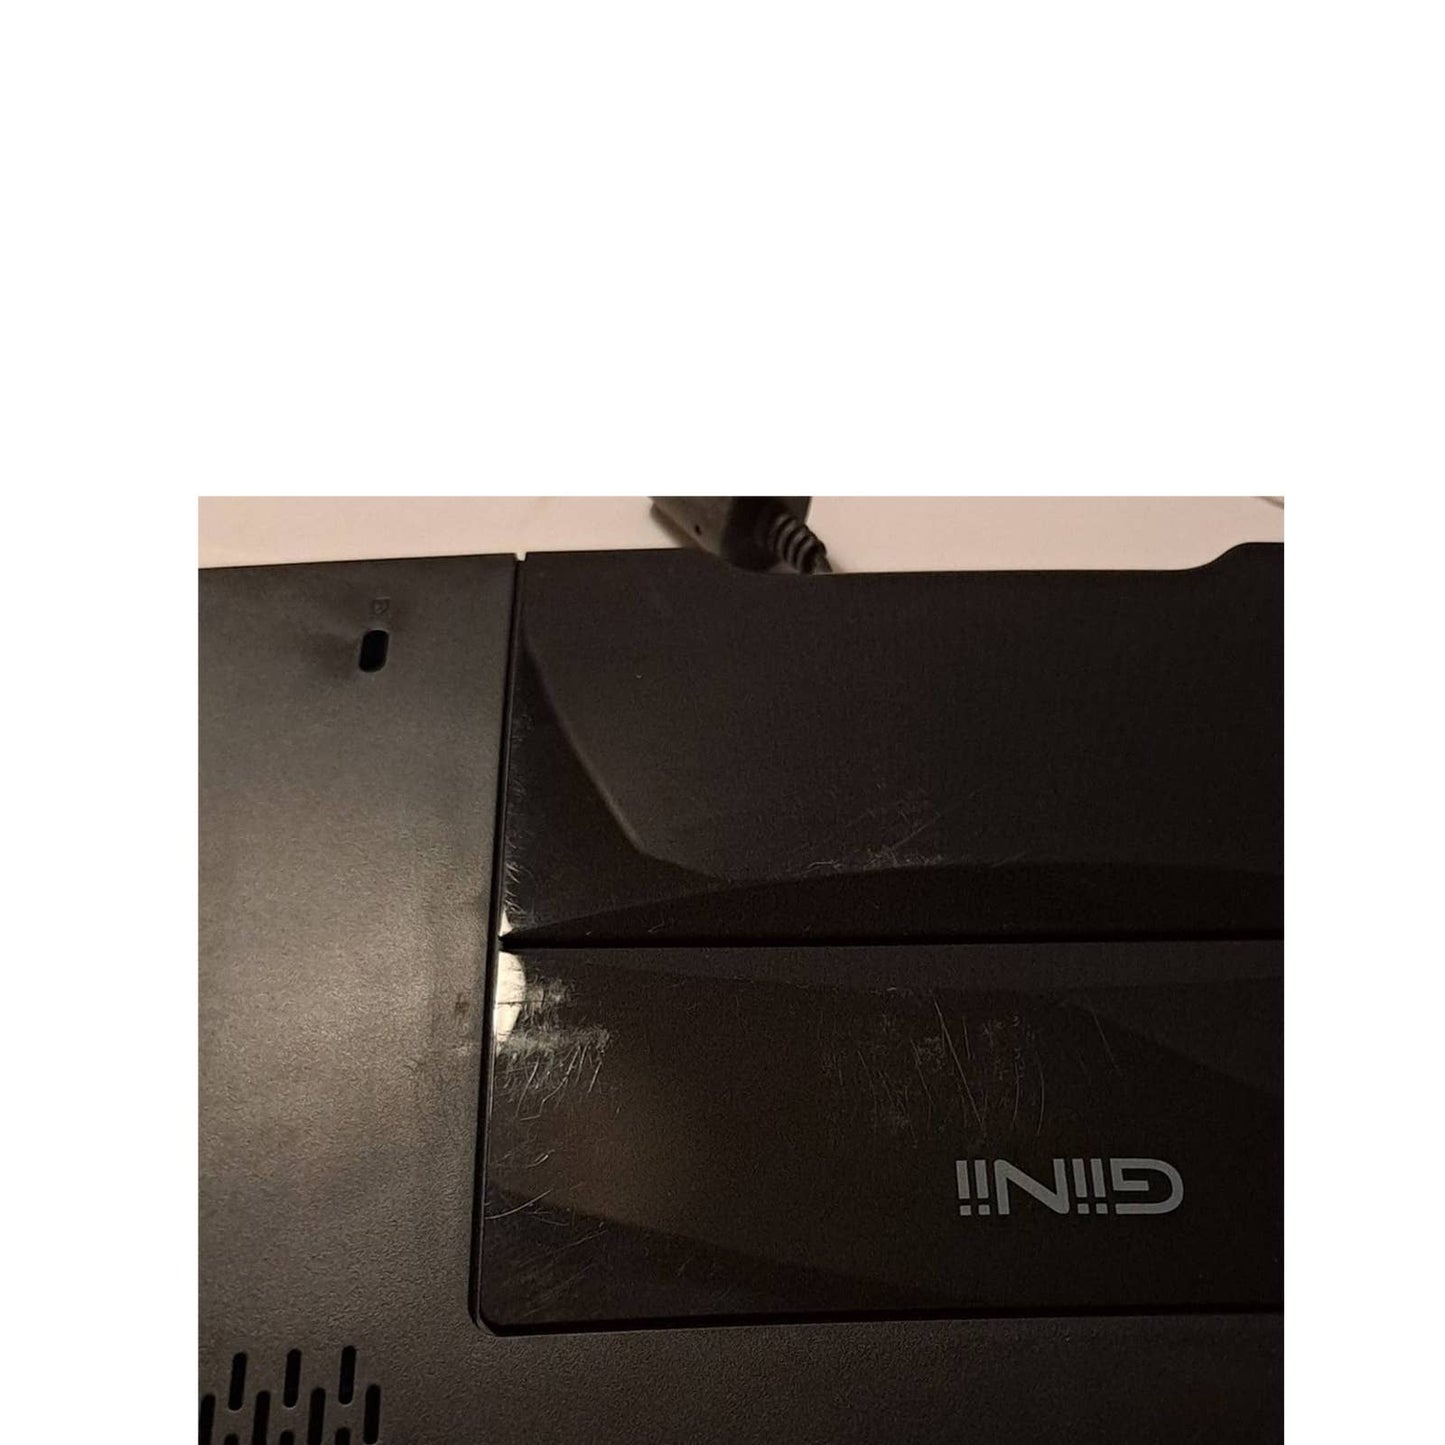 GIINII 8" Digital picture frame used but works great